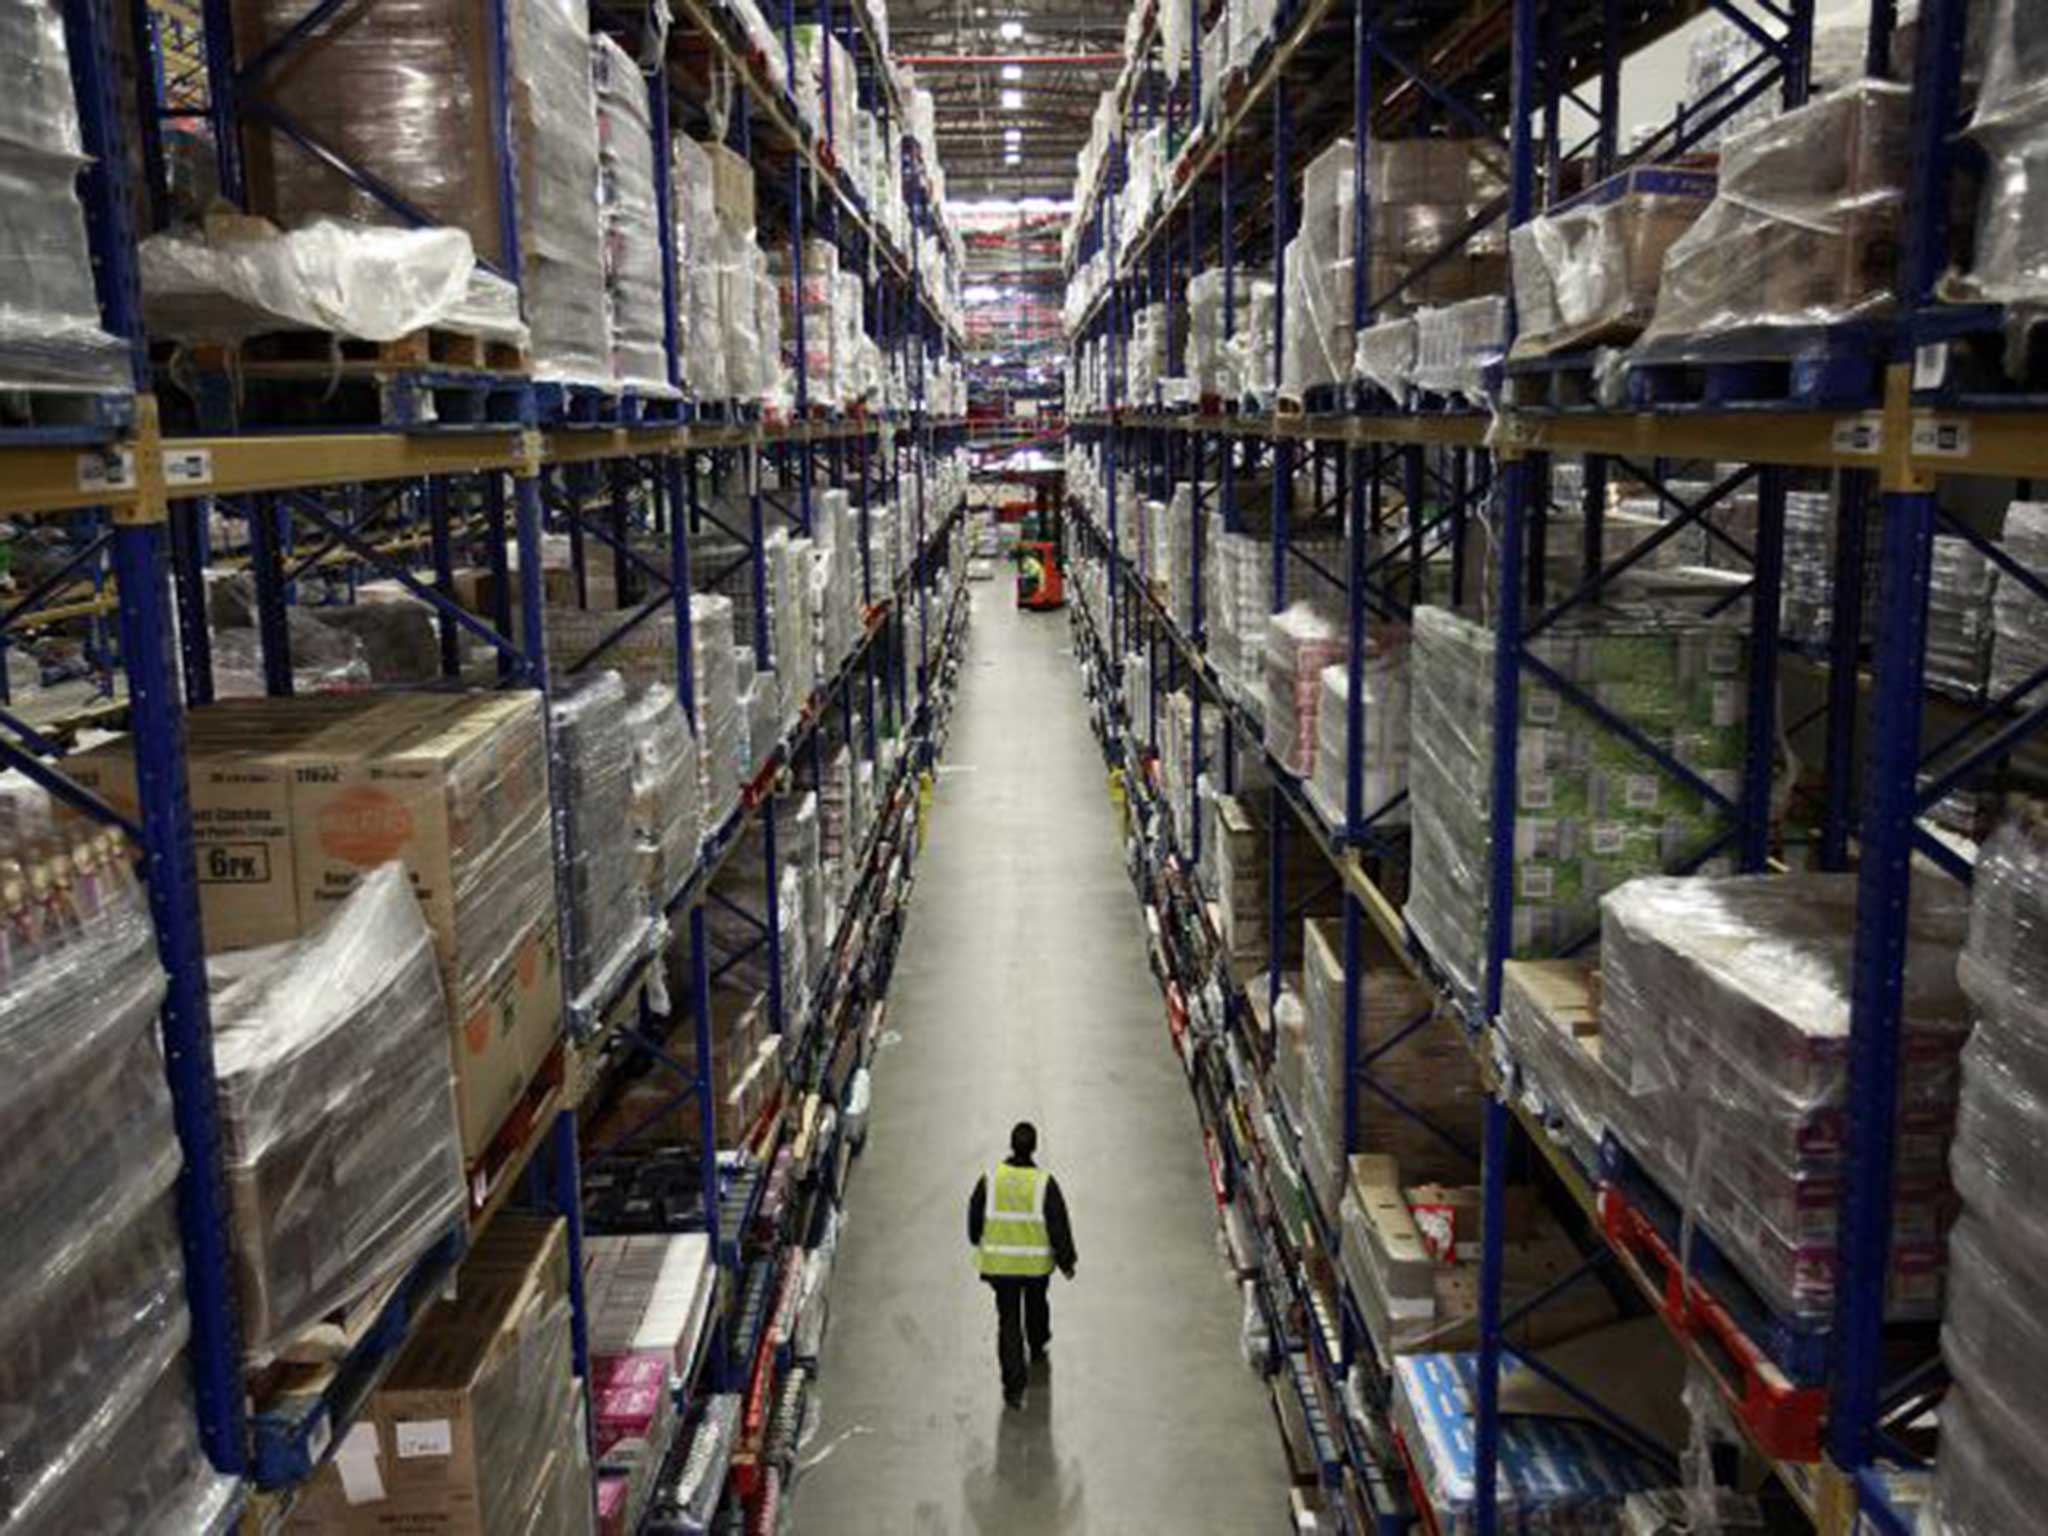 Ocado’s distribution centre in Hatfield, Hertfordshire. The grocery delivery service is under pressure amid demands for an international partnership